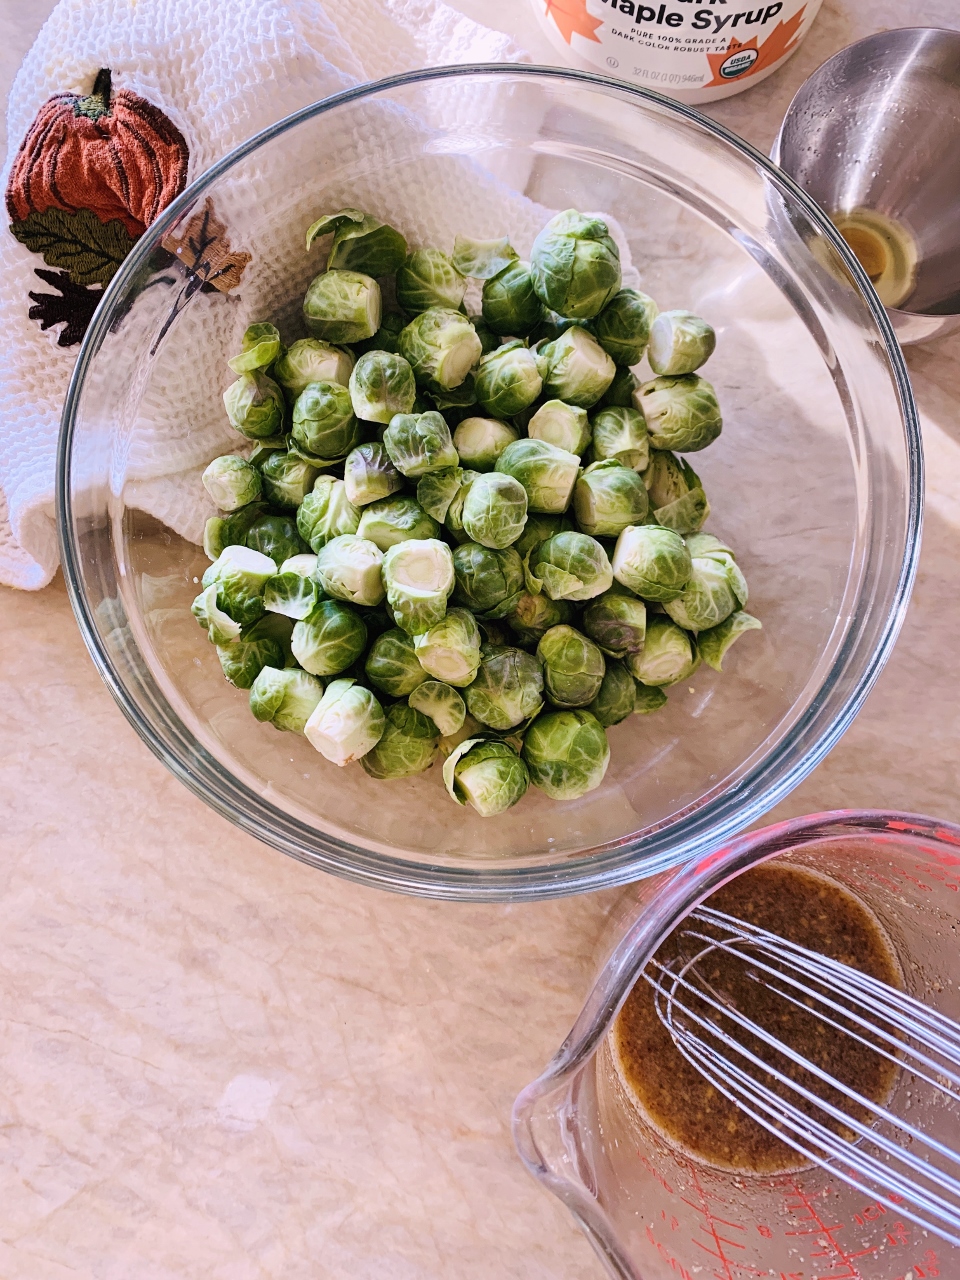 Maple-Mustard Glazed Brussels Sprouts with Bacon – Recipe! Image 3